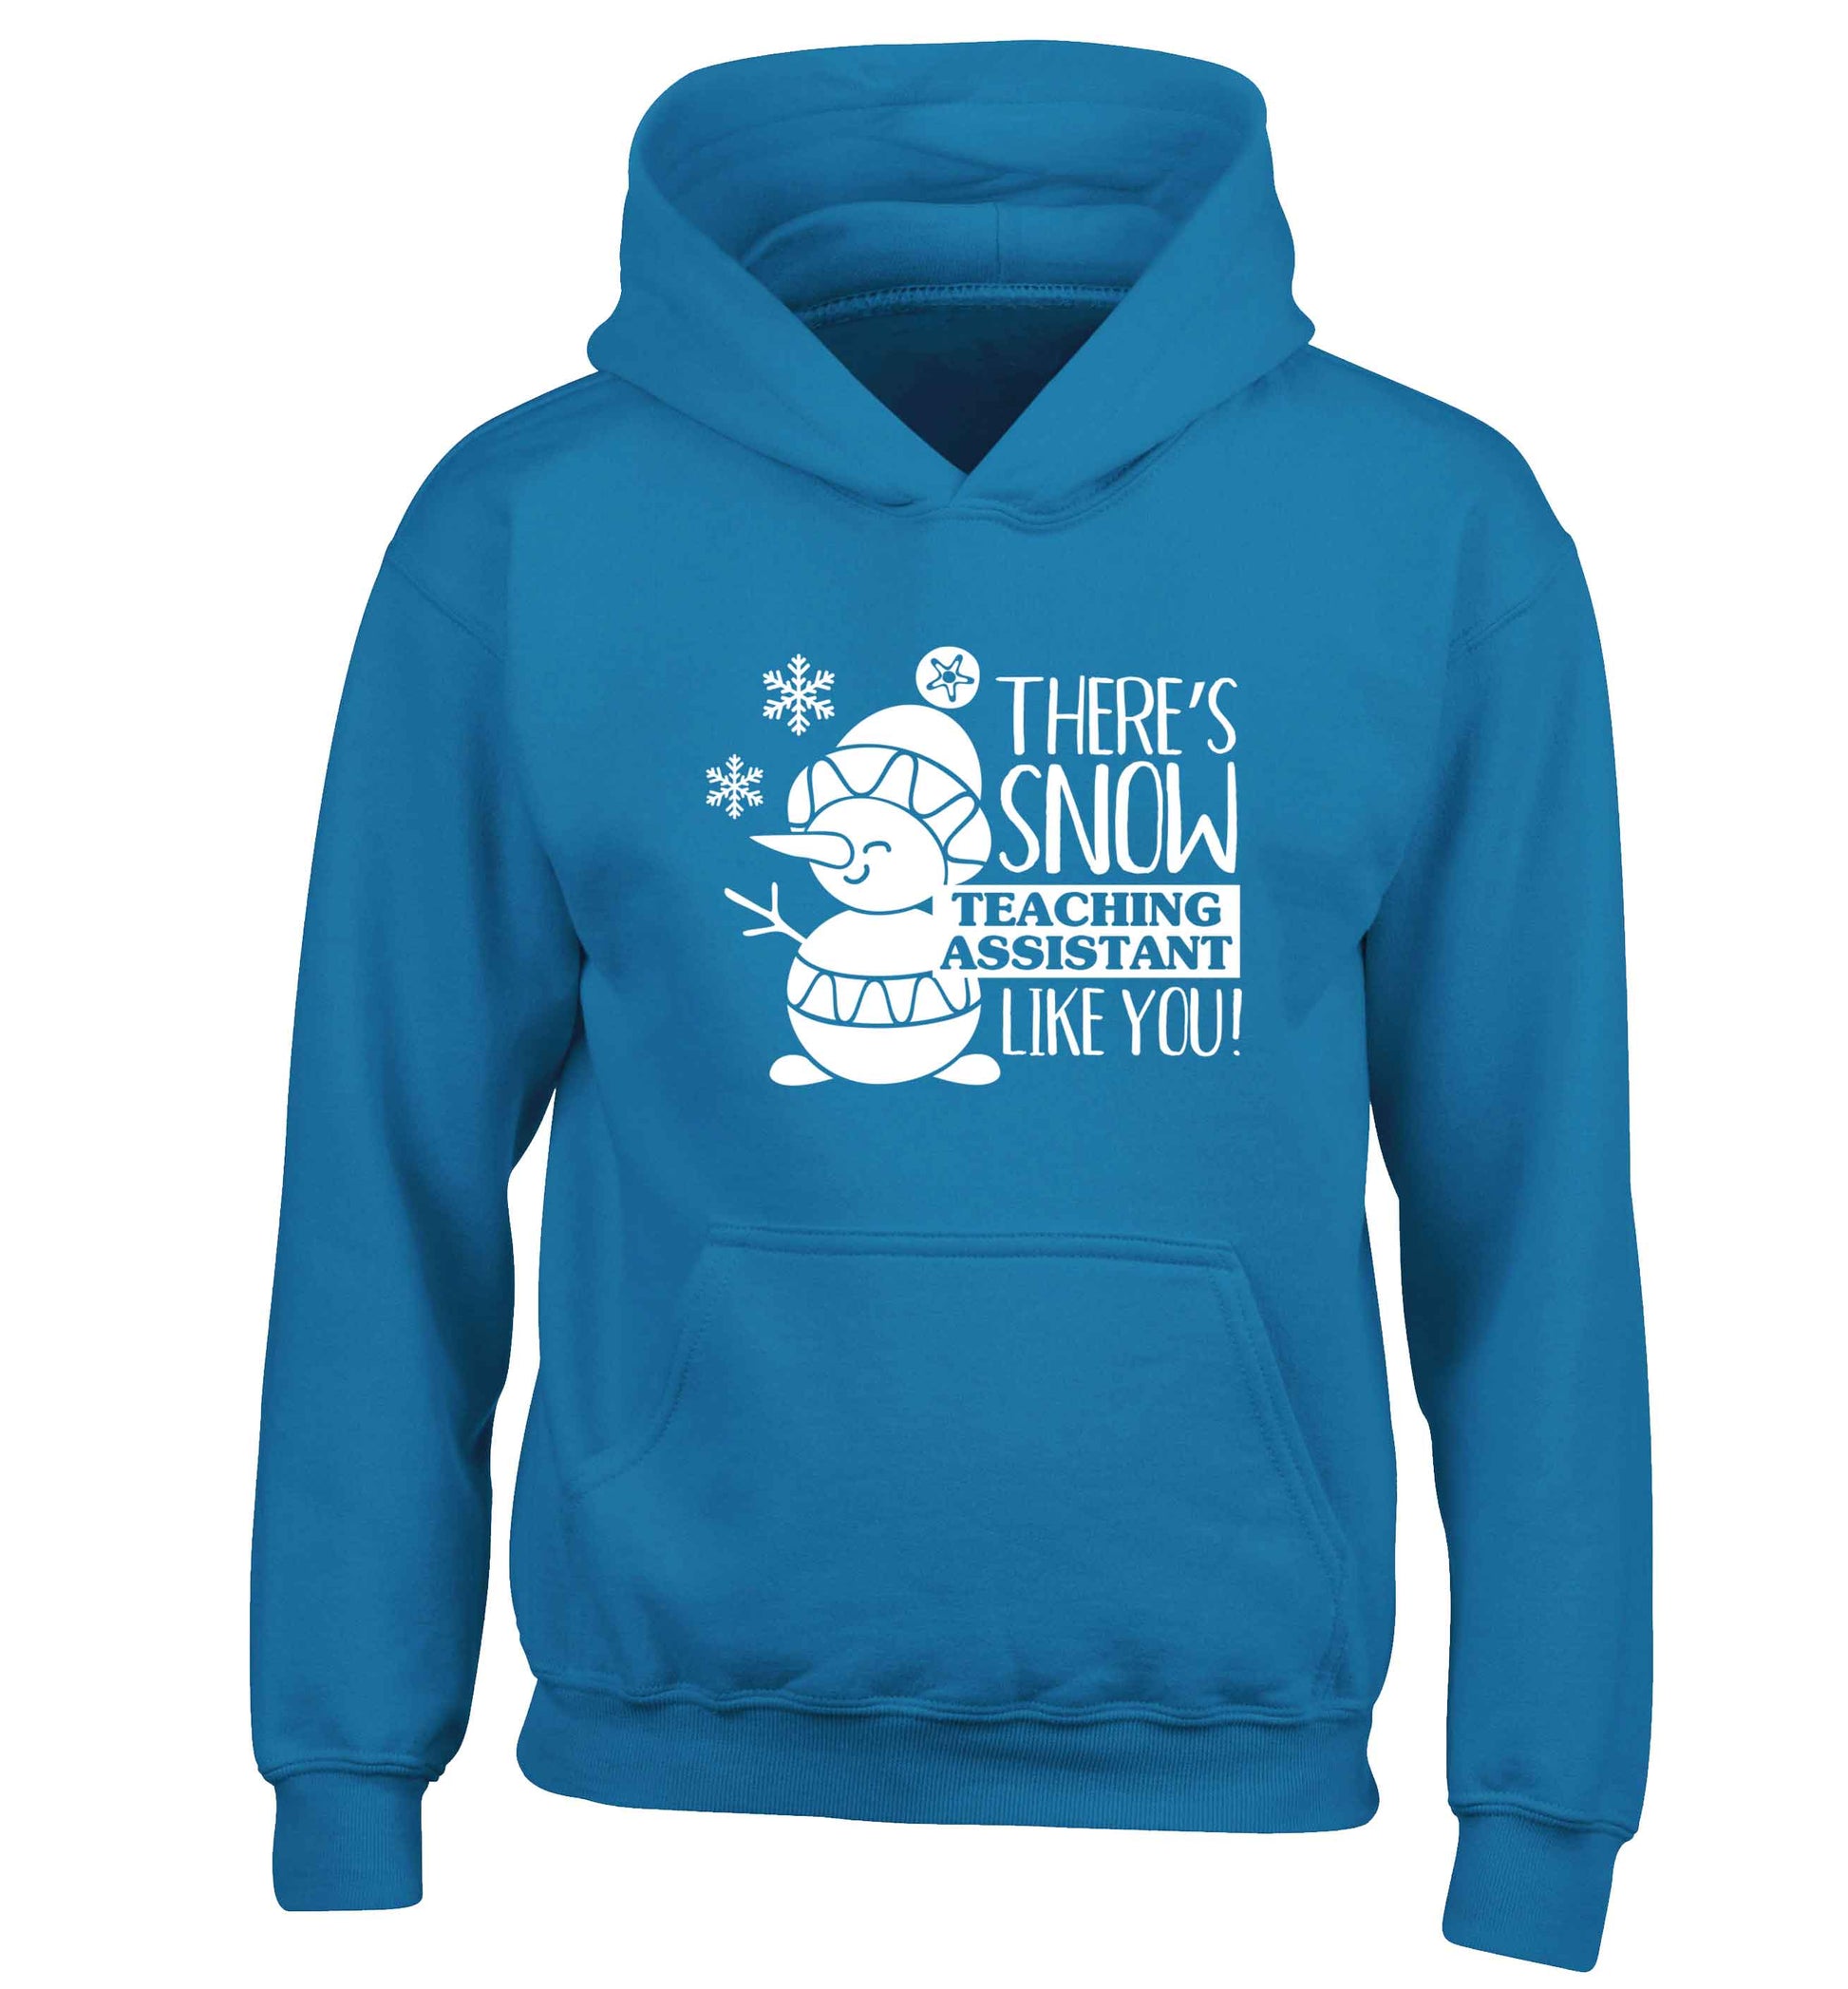 There's snow teaching assistant like you children's blue hoodie 12-13 Years